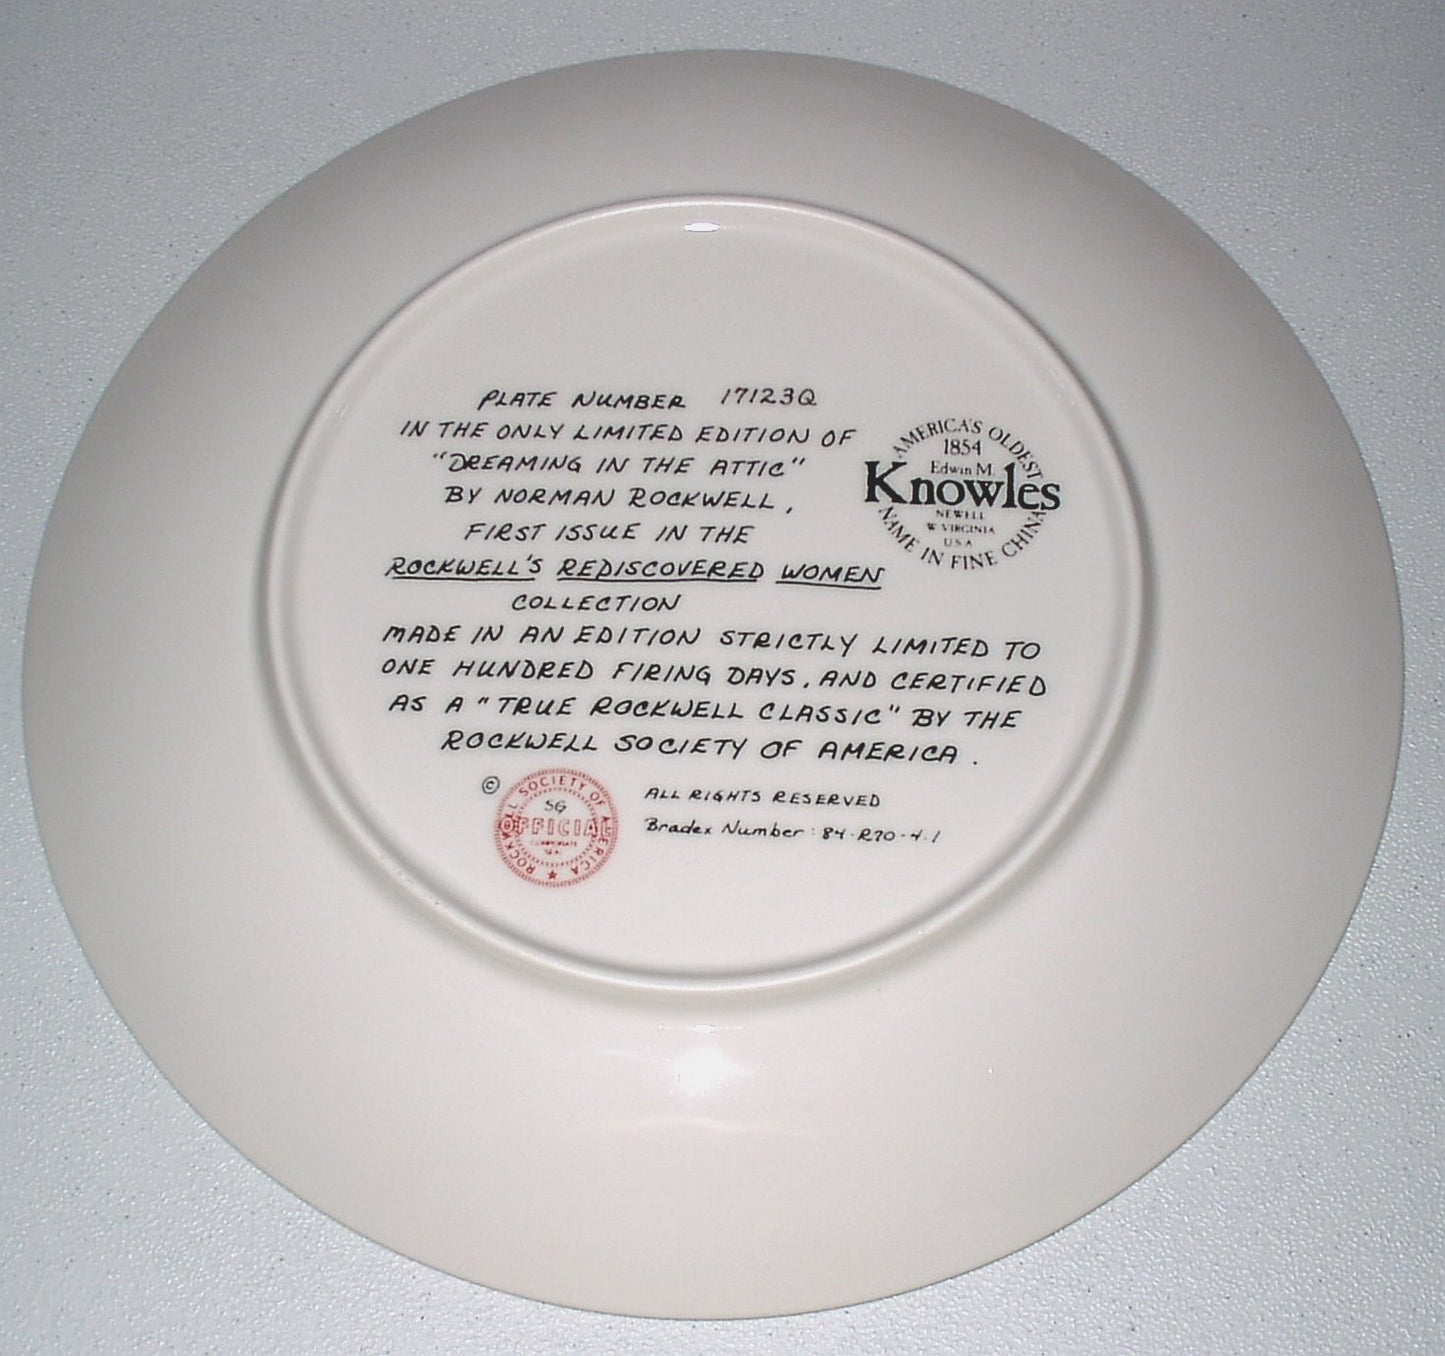 Edwin M. Knowles "Dreaming in the Attic" Collector's Plate